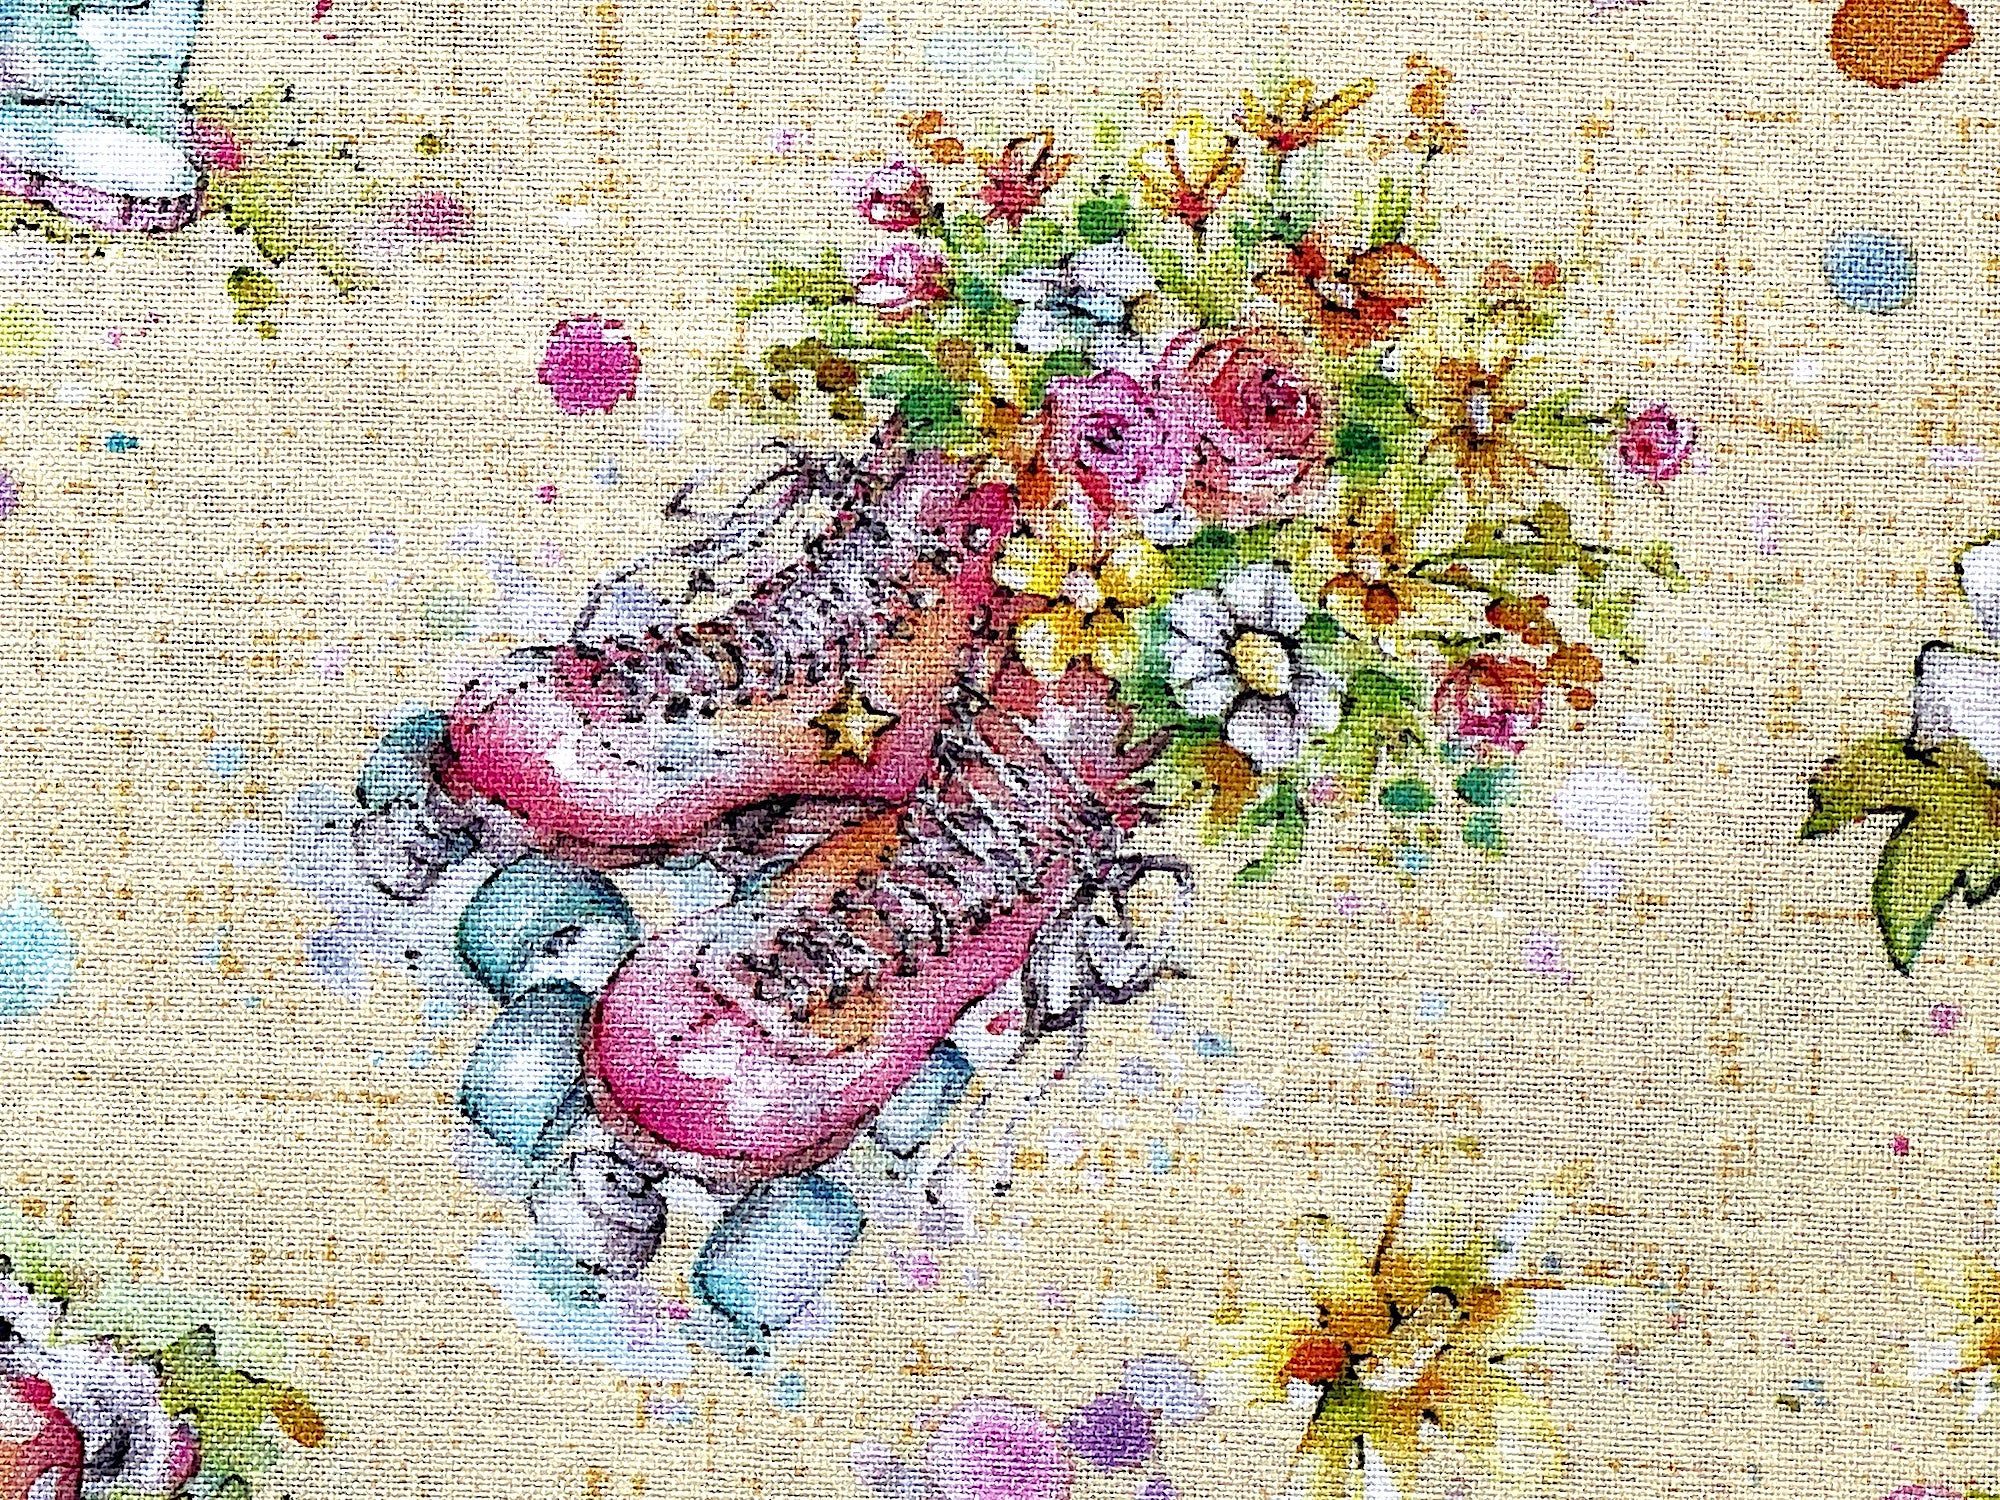 Close up of a pair of a pink set of roller skates that are filled with flowers.